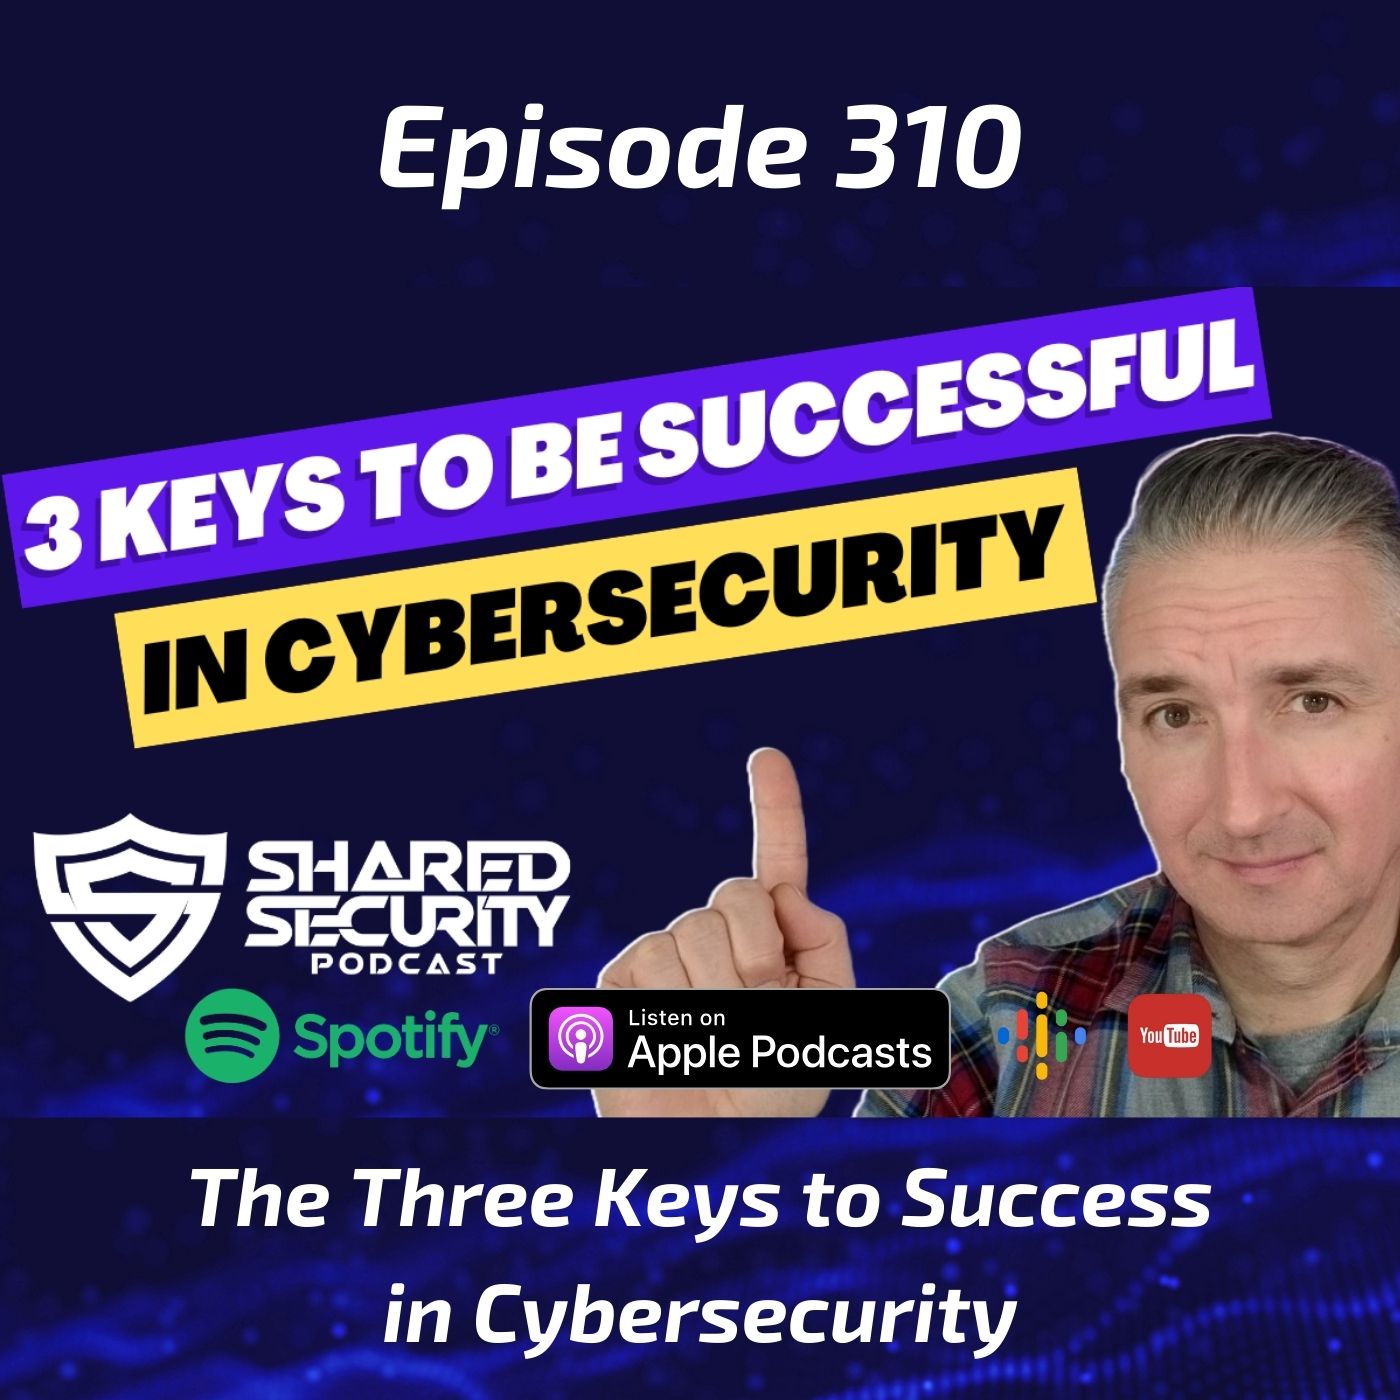 The Three Keys to Success in Cybersecurity